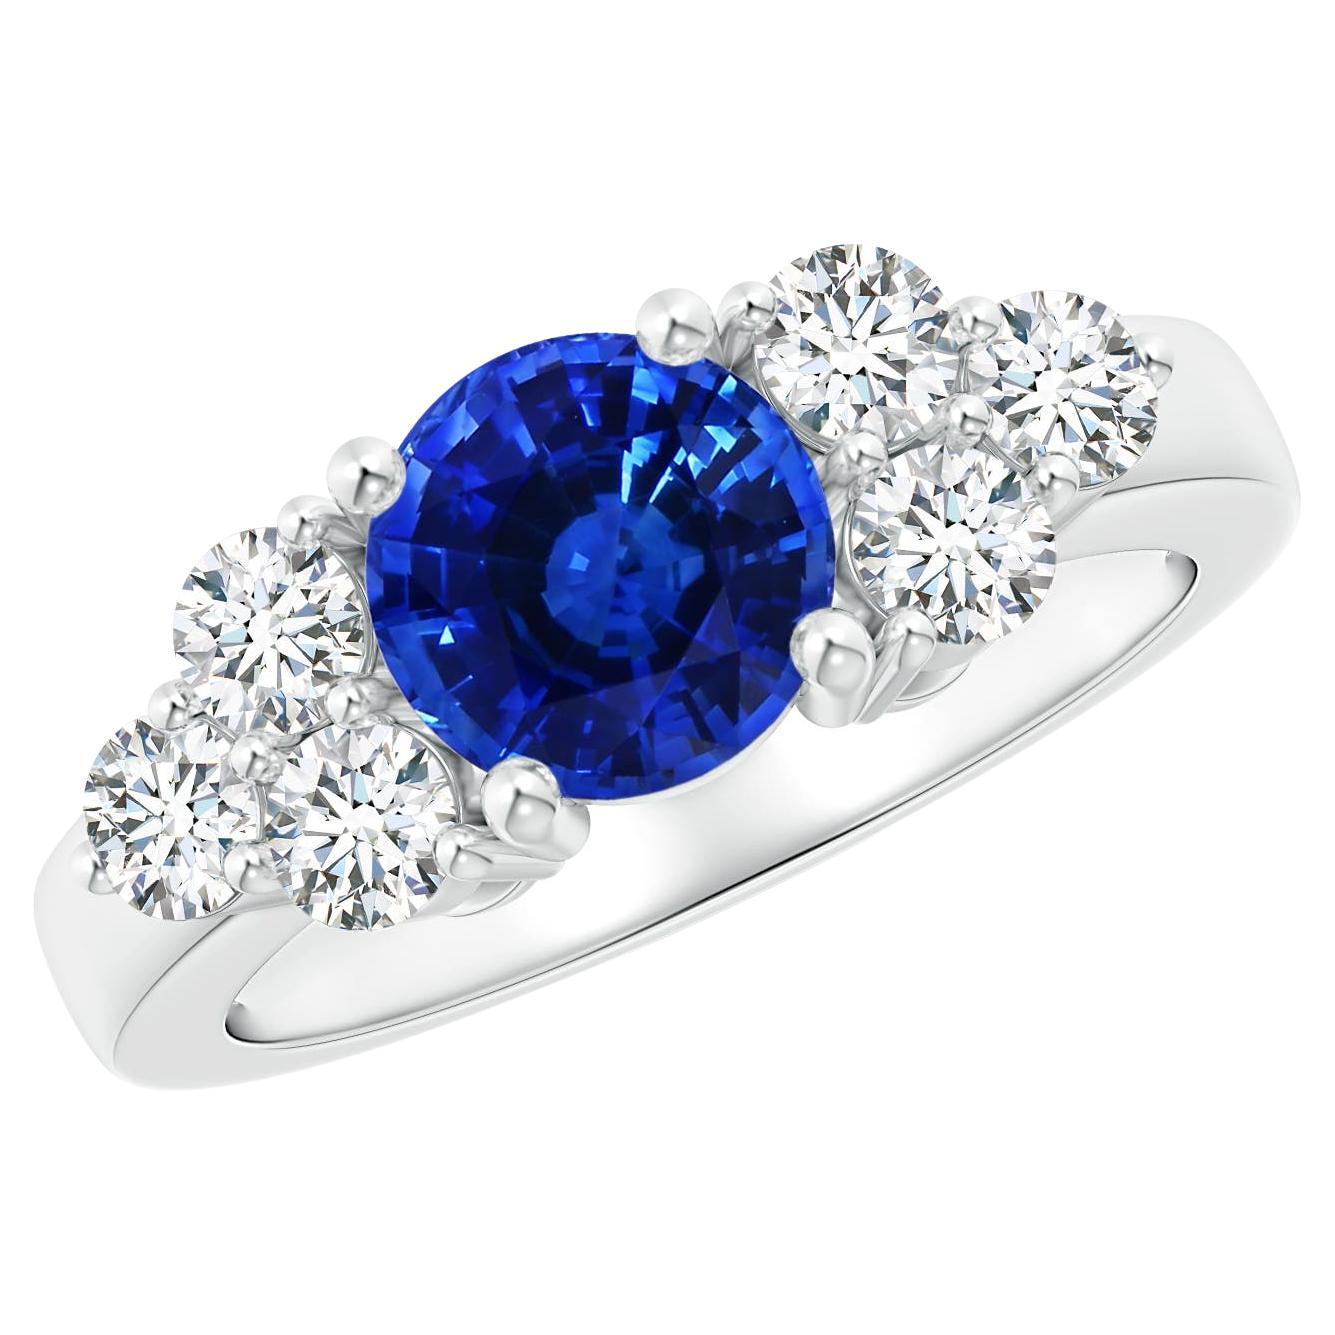 For Sale:  Angara Gia Certified Natural Blue Sapphire White Gold Ring with Trio Diamonds